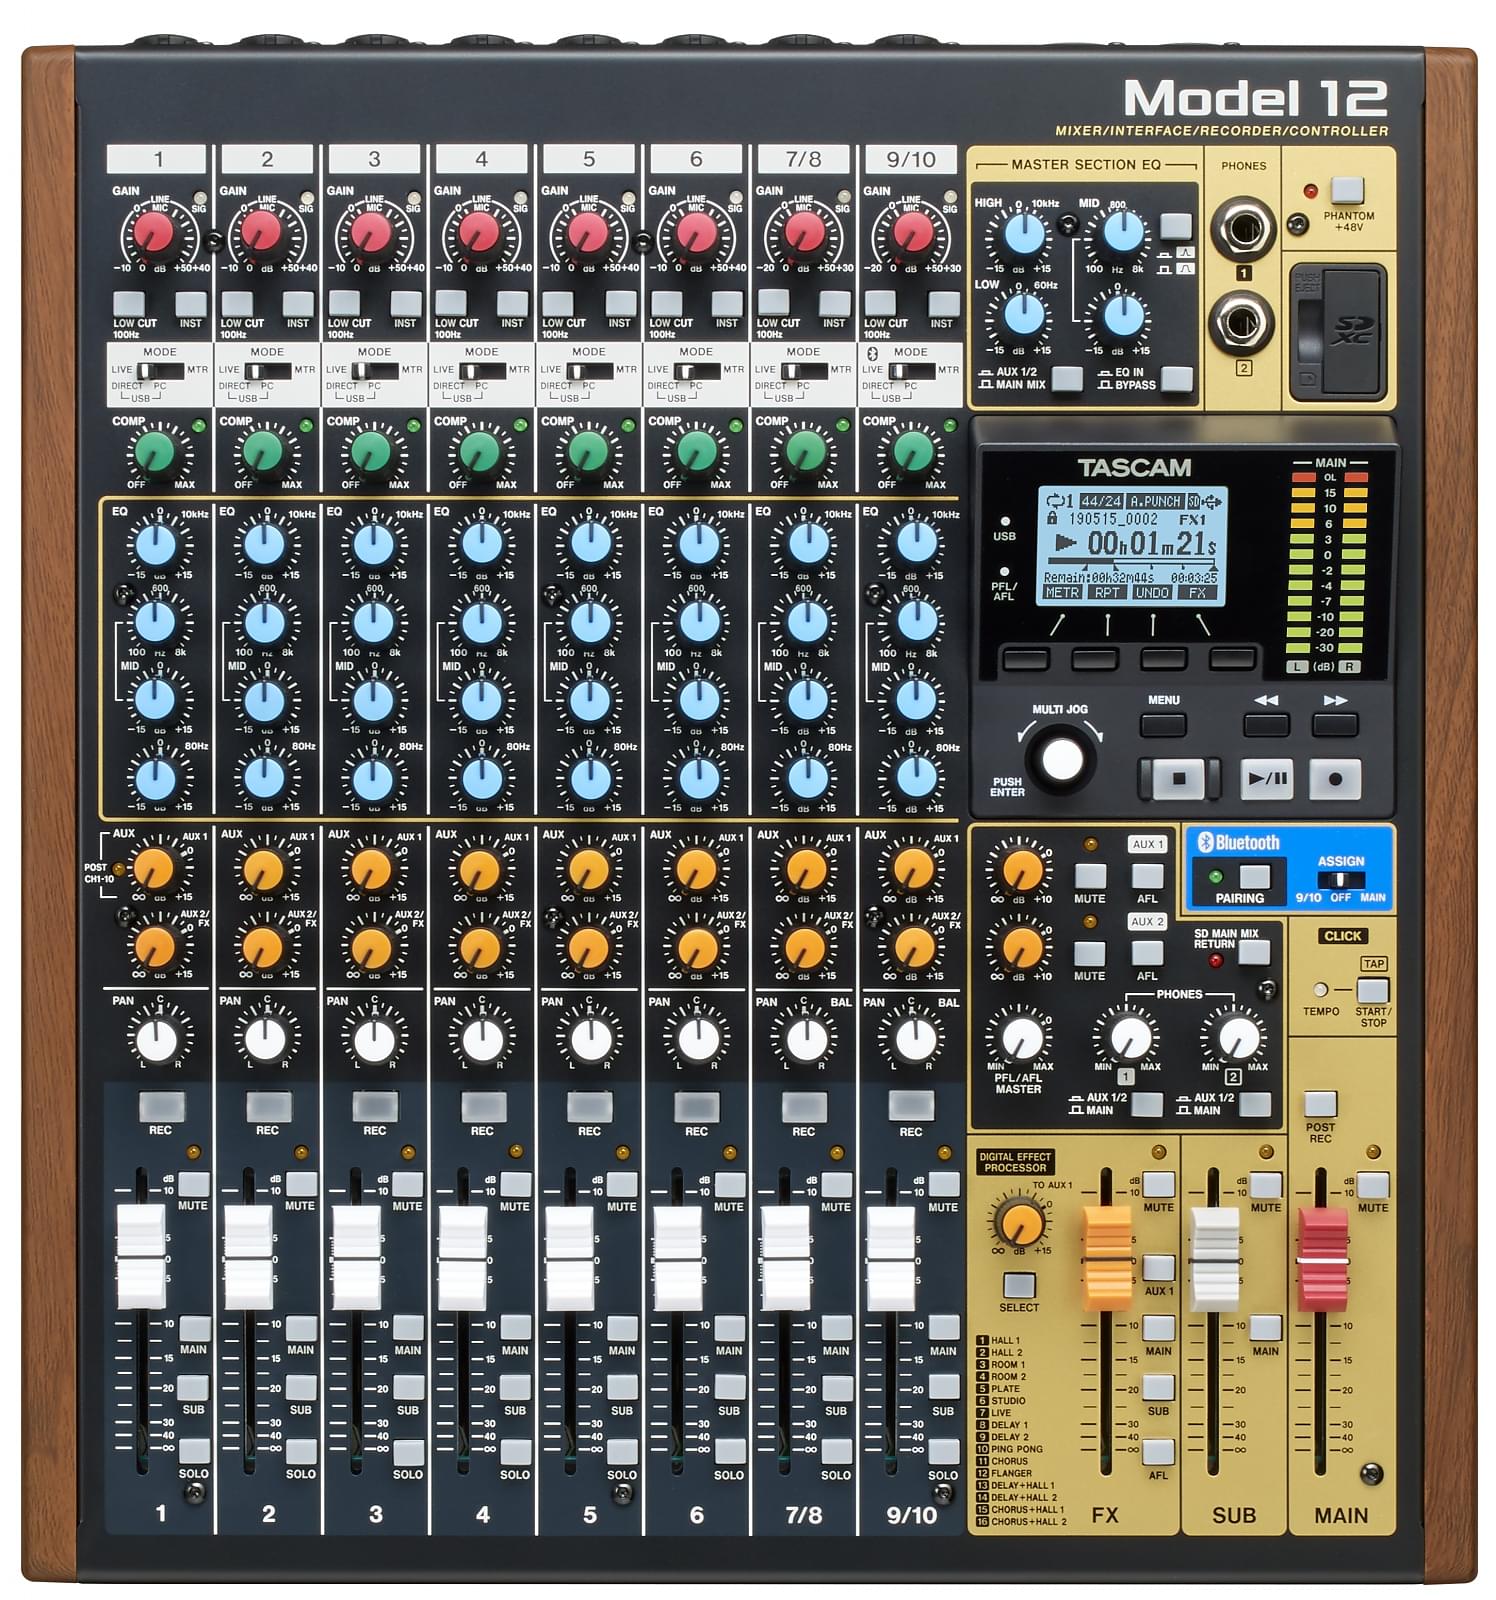 Top view | Tascam Model 12